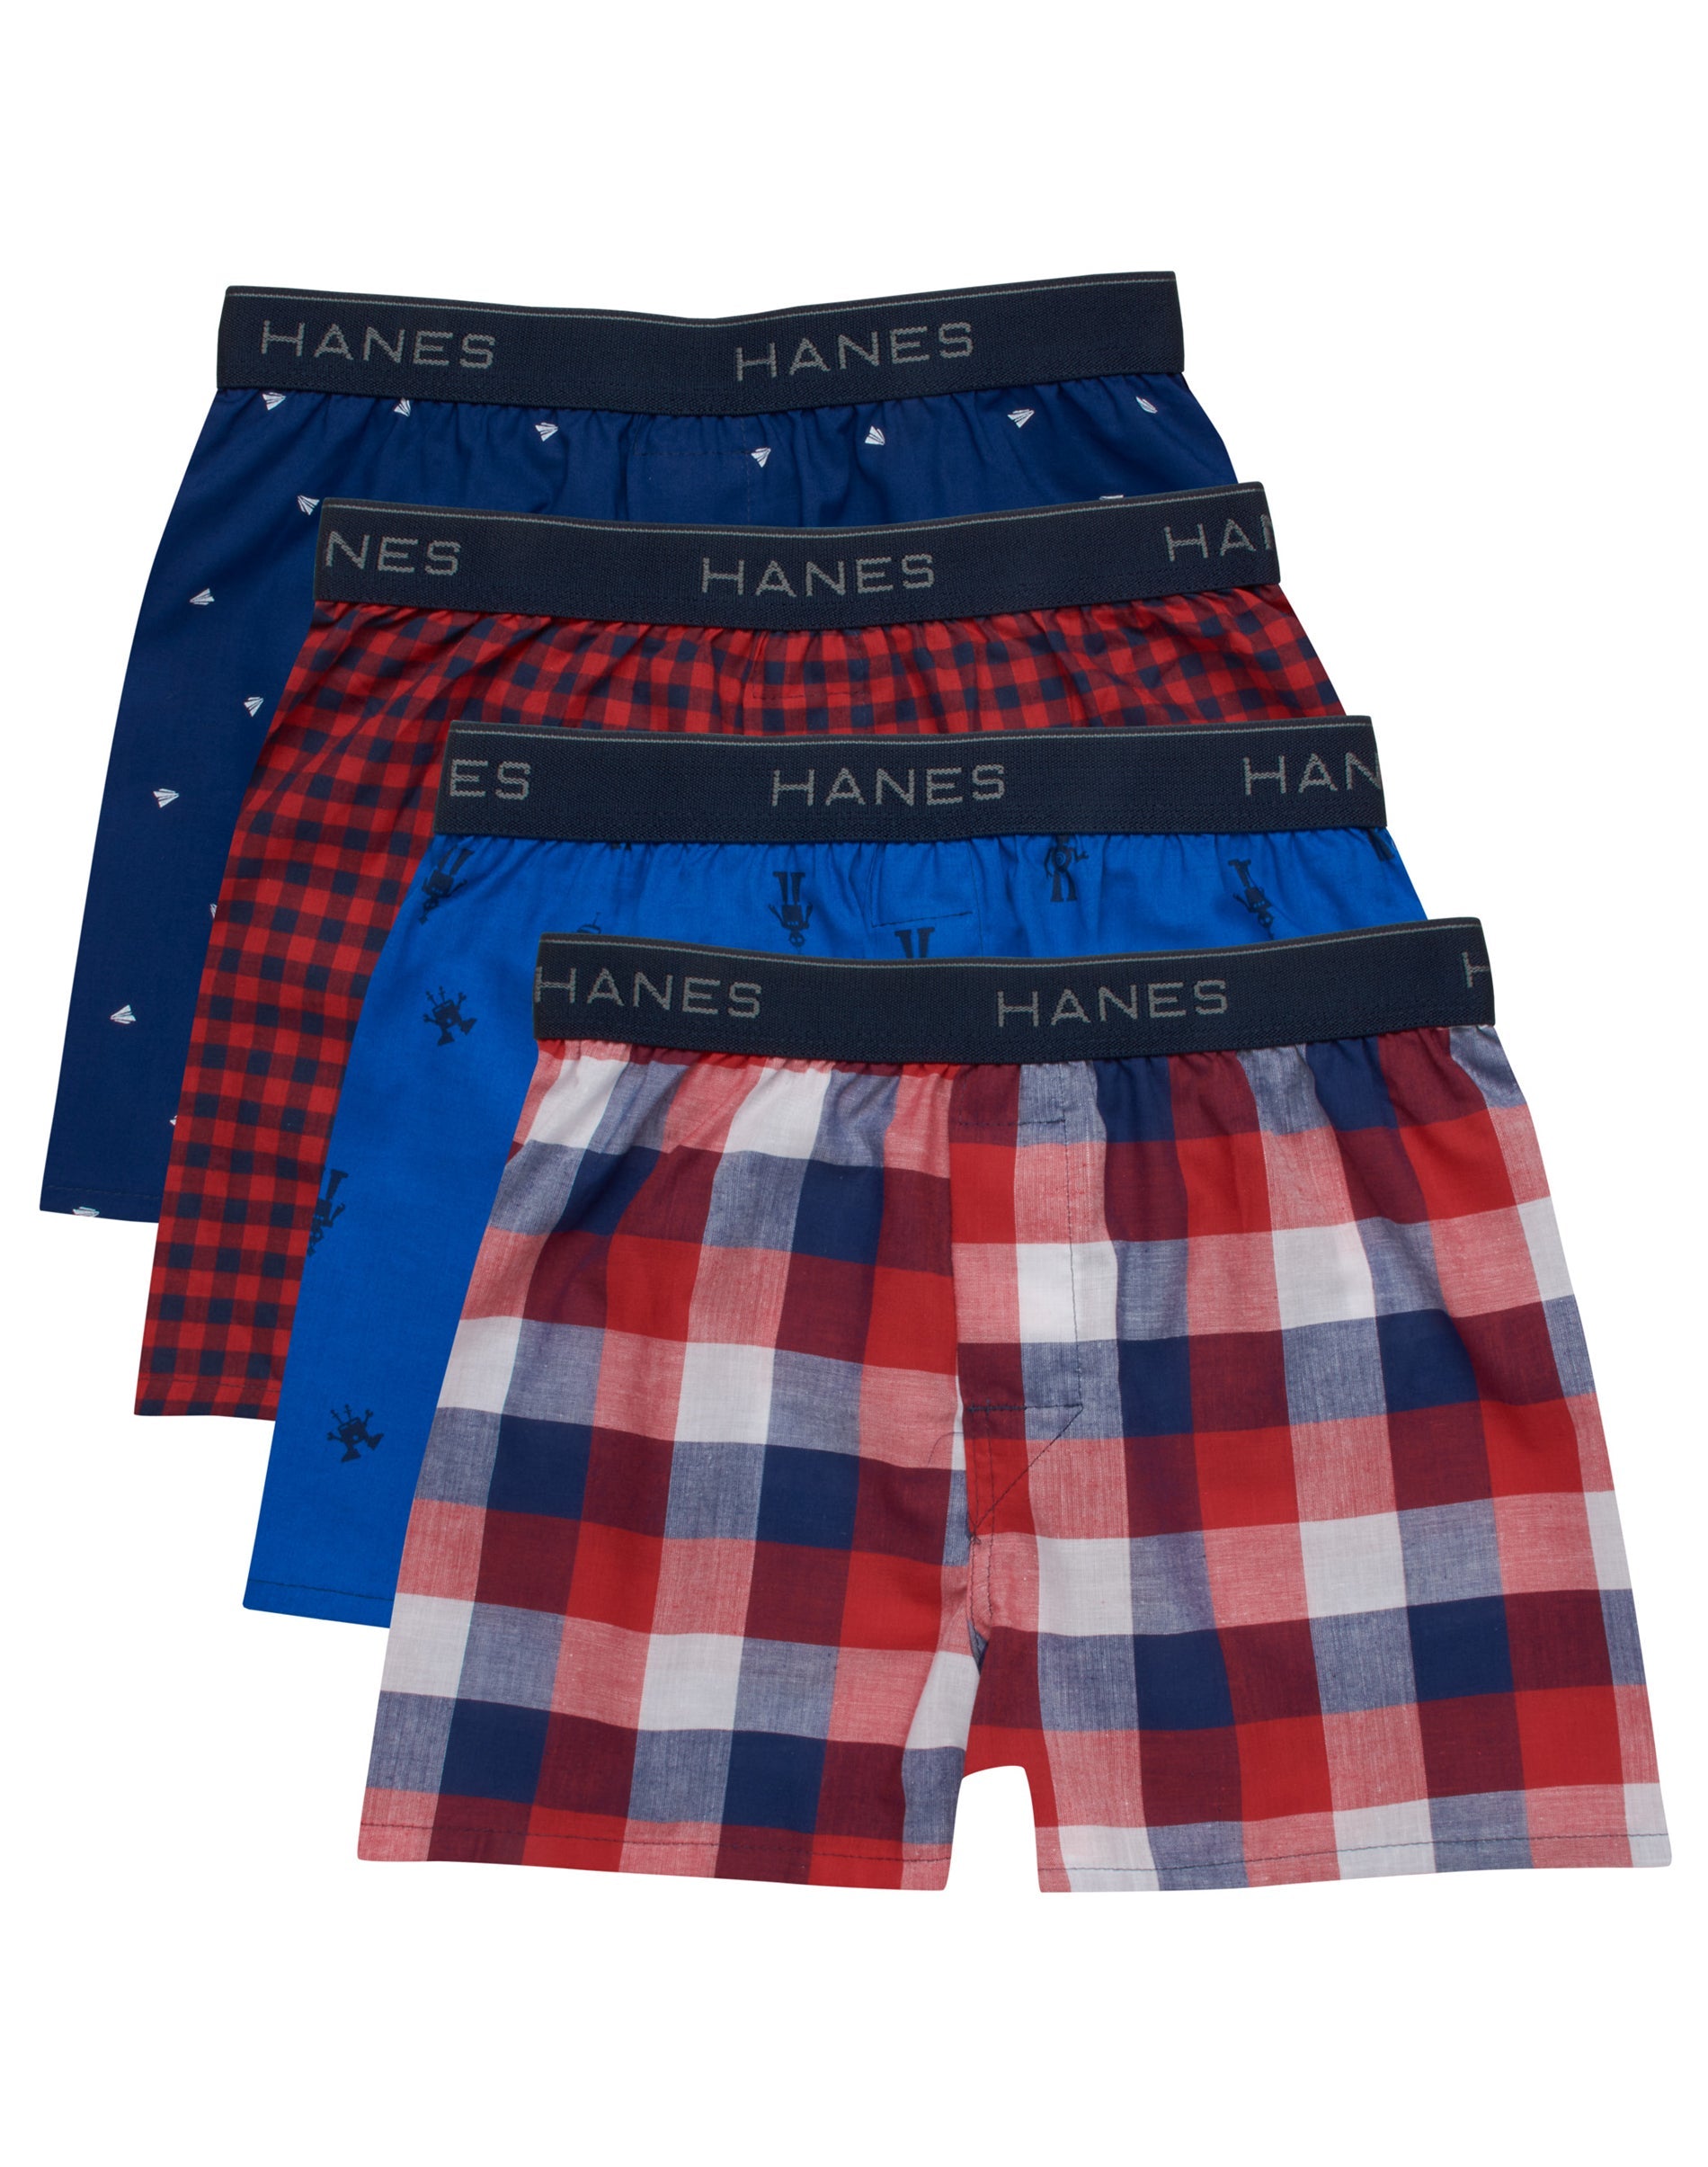 HANES Boys' Ultimate Lightweight Boxer Briefs, 5-Pack - Eastern